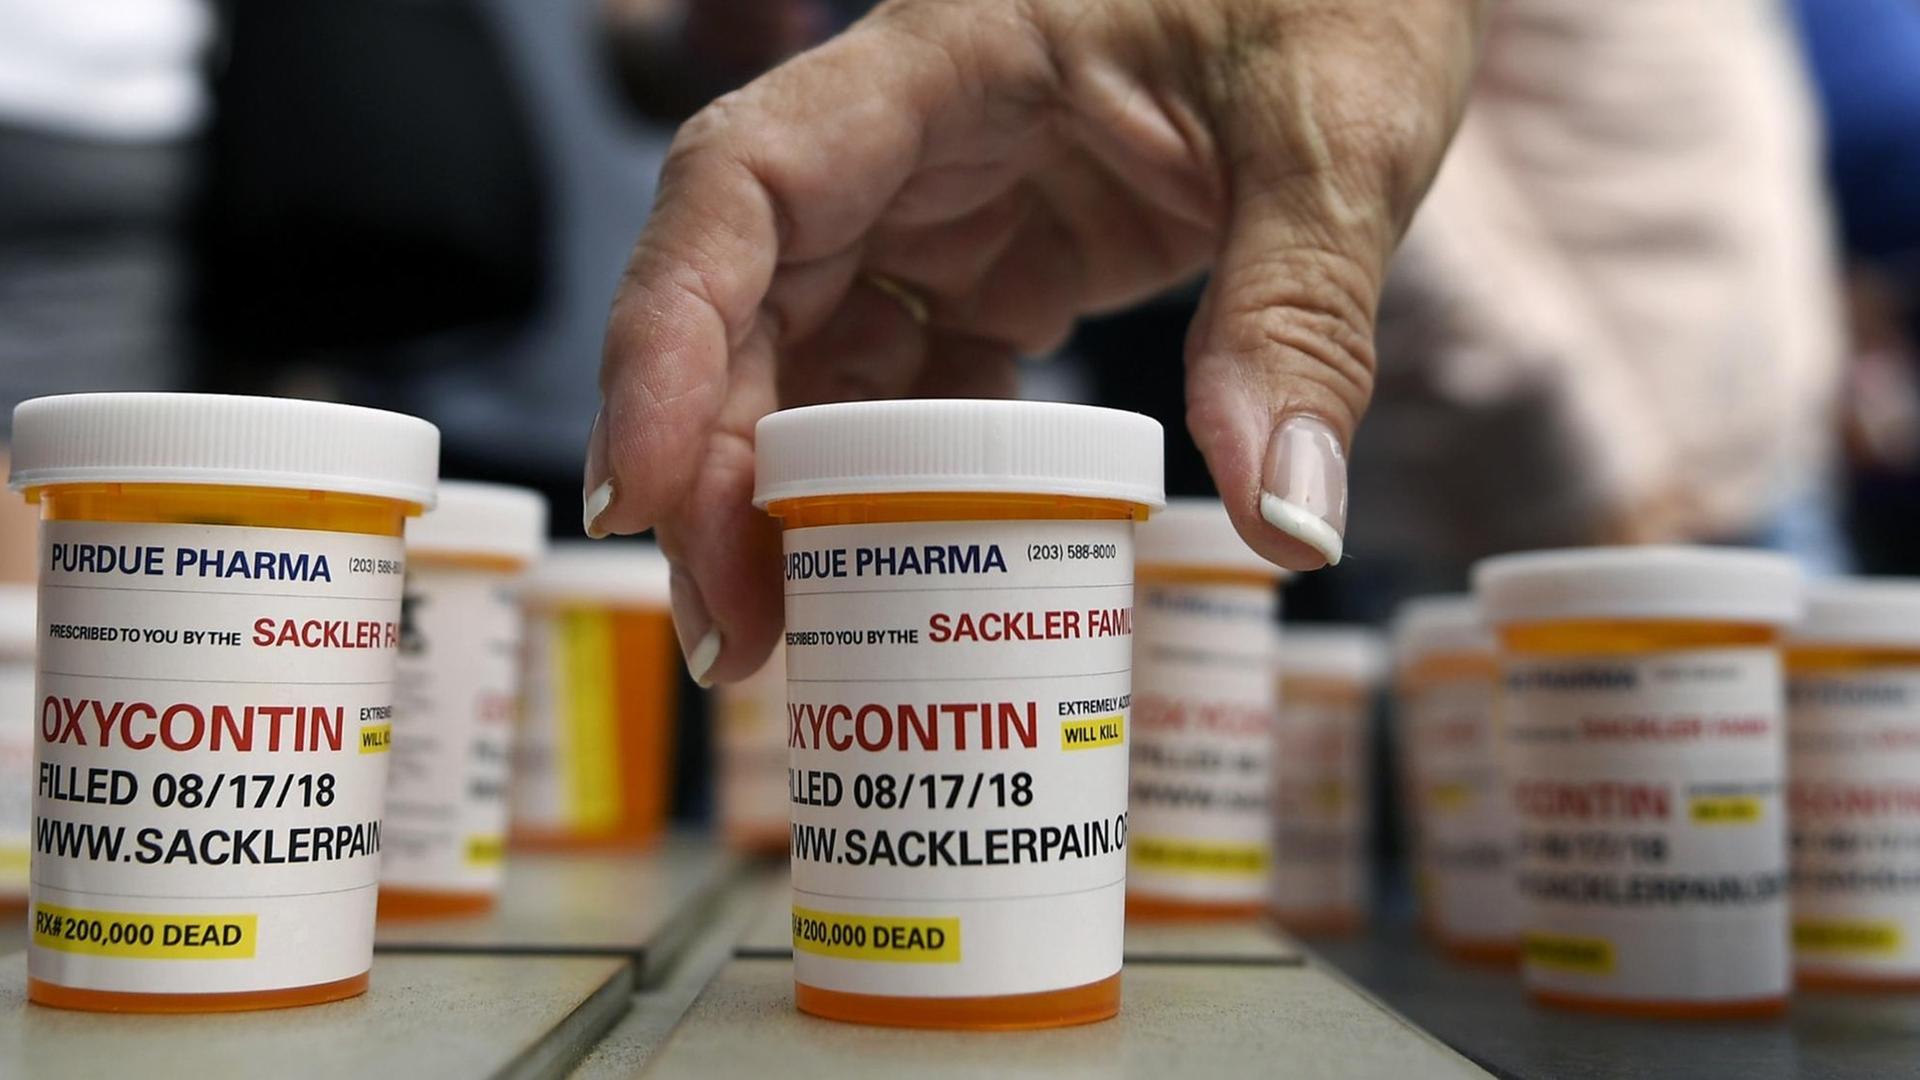 FILE - In this Aug. 17, 2018 file photo, family and friends who have lost loved ones to OxyContin and opioid overdoses leave pill bottles in protest outside the headquarters of Purdue Pharma, which is owned by the Sackler family, in Stamford, Conn. New York is suing the billionaire family behind Oxycontin, alleging the drugmaker fueled the opioid crisis by putting hunger for profits over patient safety. (AP Photo/Jessica Hill, File) |